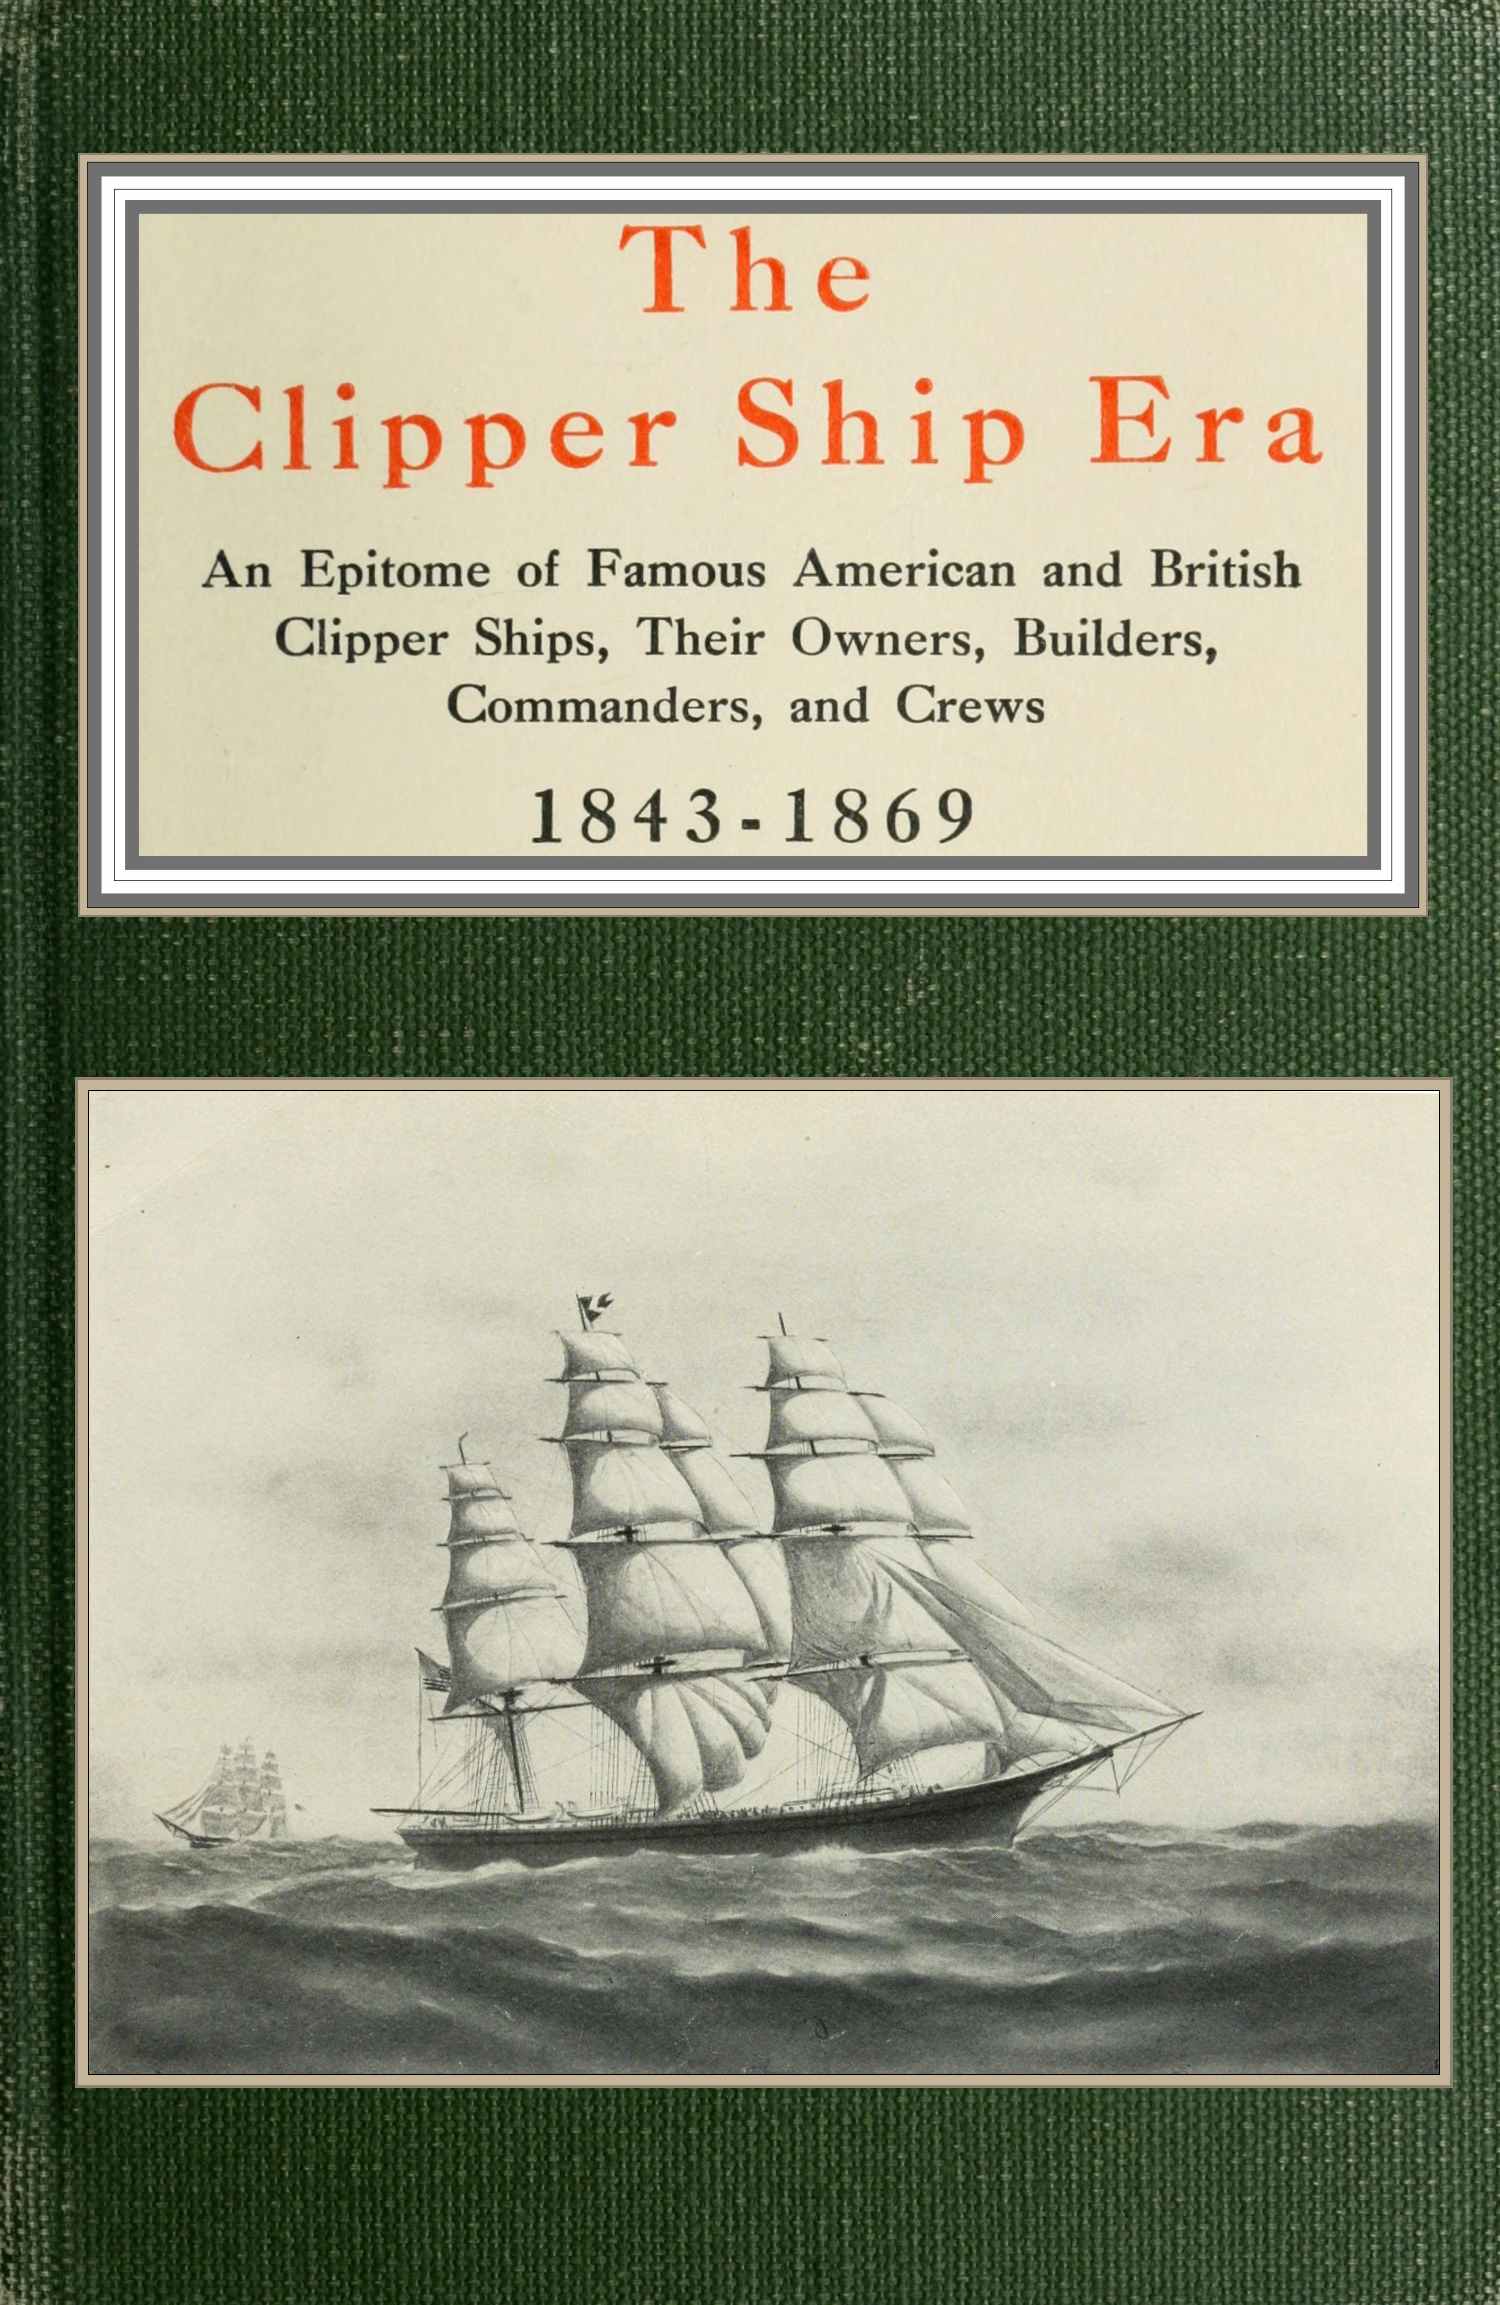 The Project Gutenberg eBook of The clipper ship era, by Arthur H